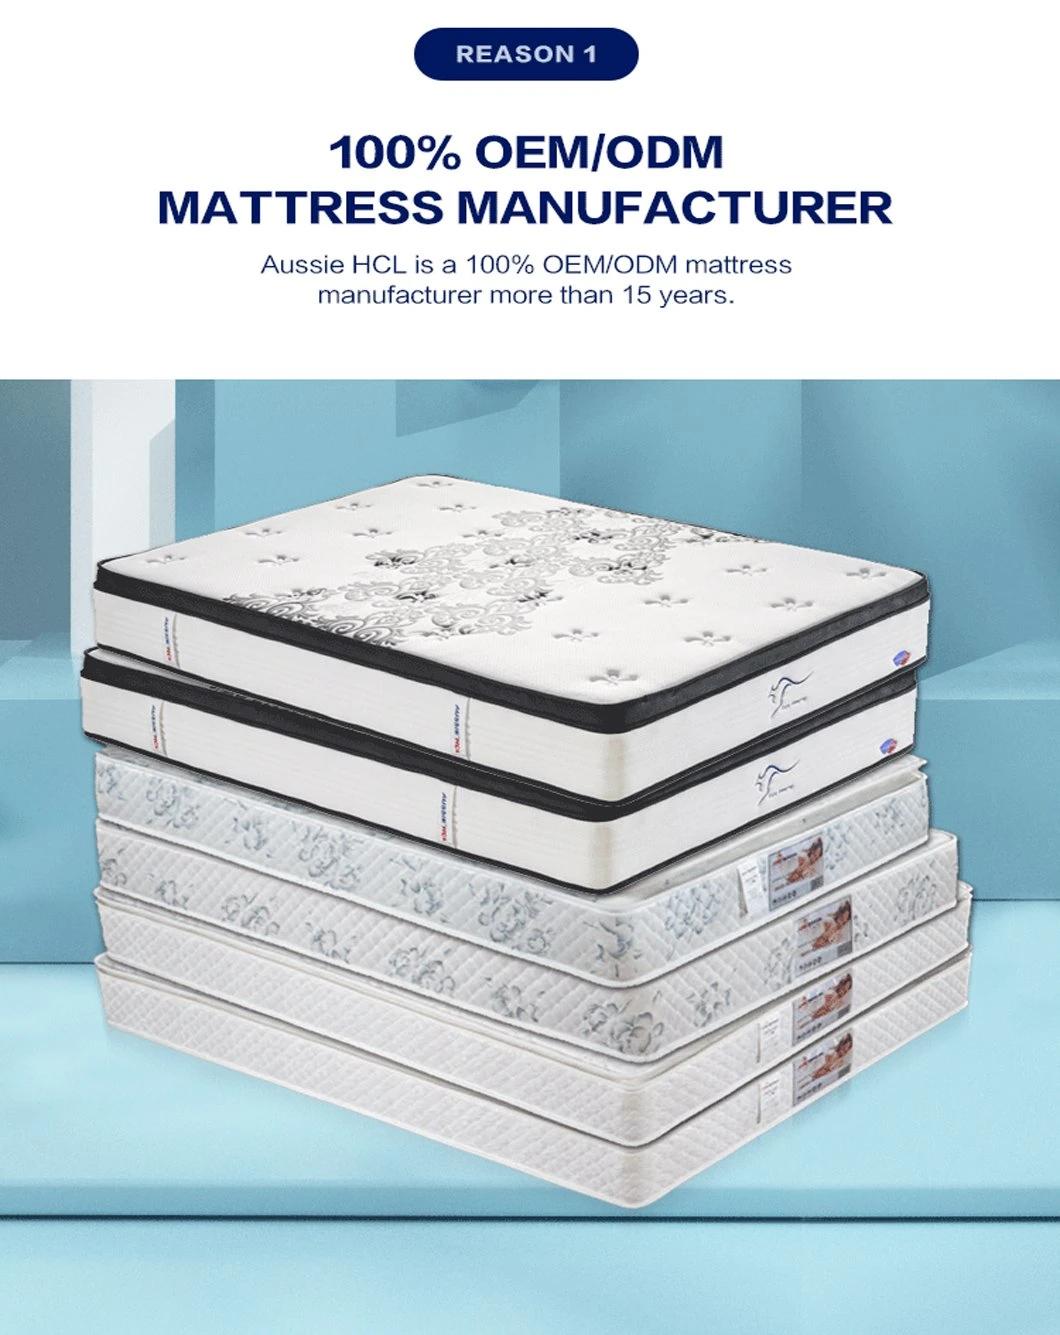 Factory Wholesale Queen King Double Full Size Cool Gel Memory Foam Mattress Compressed in Box Package